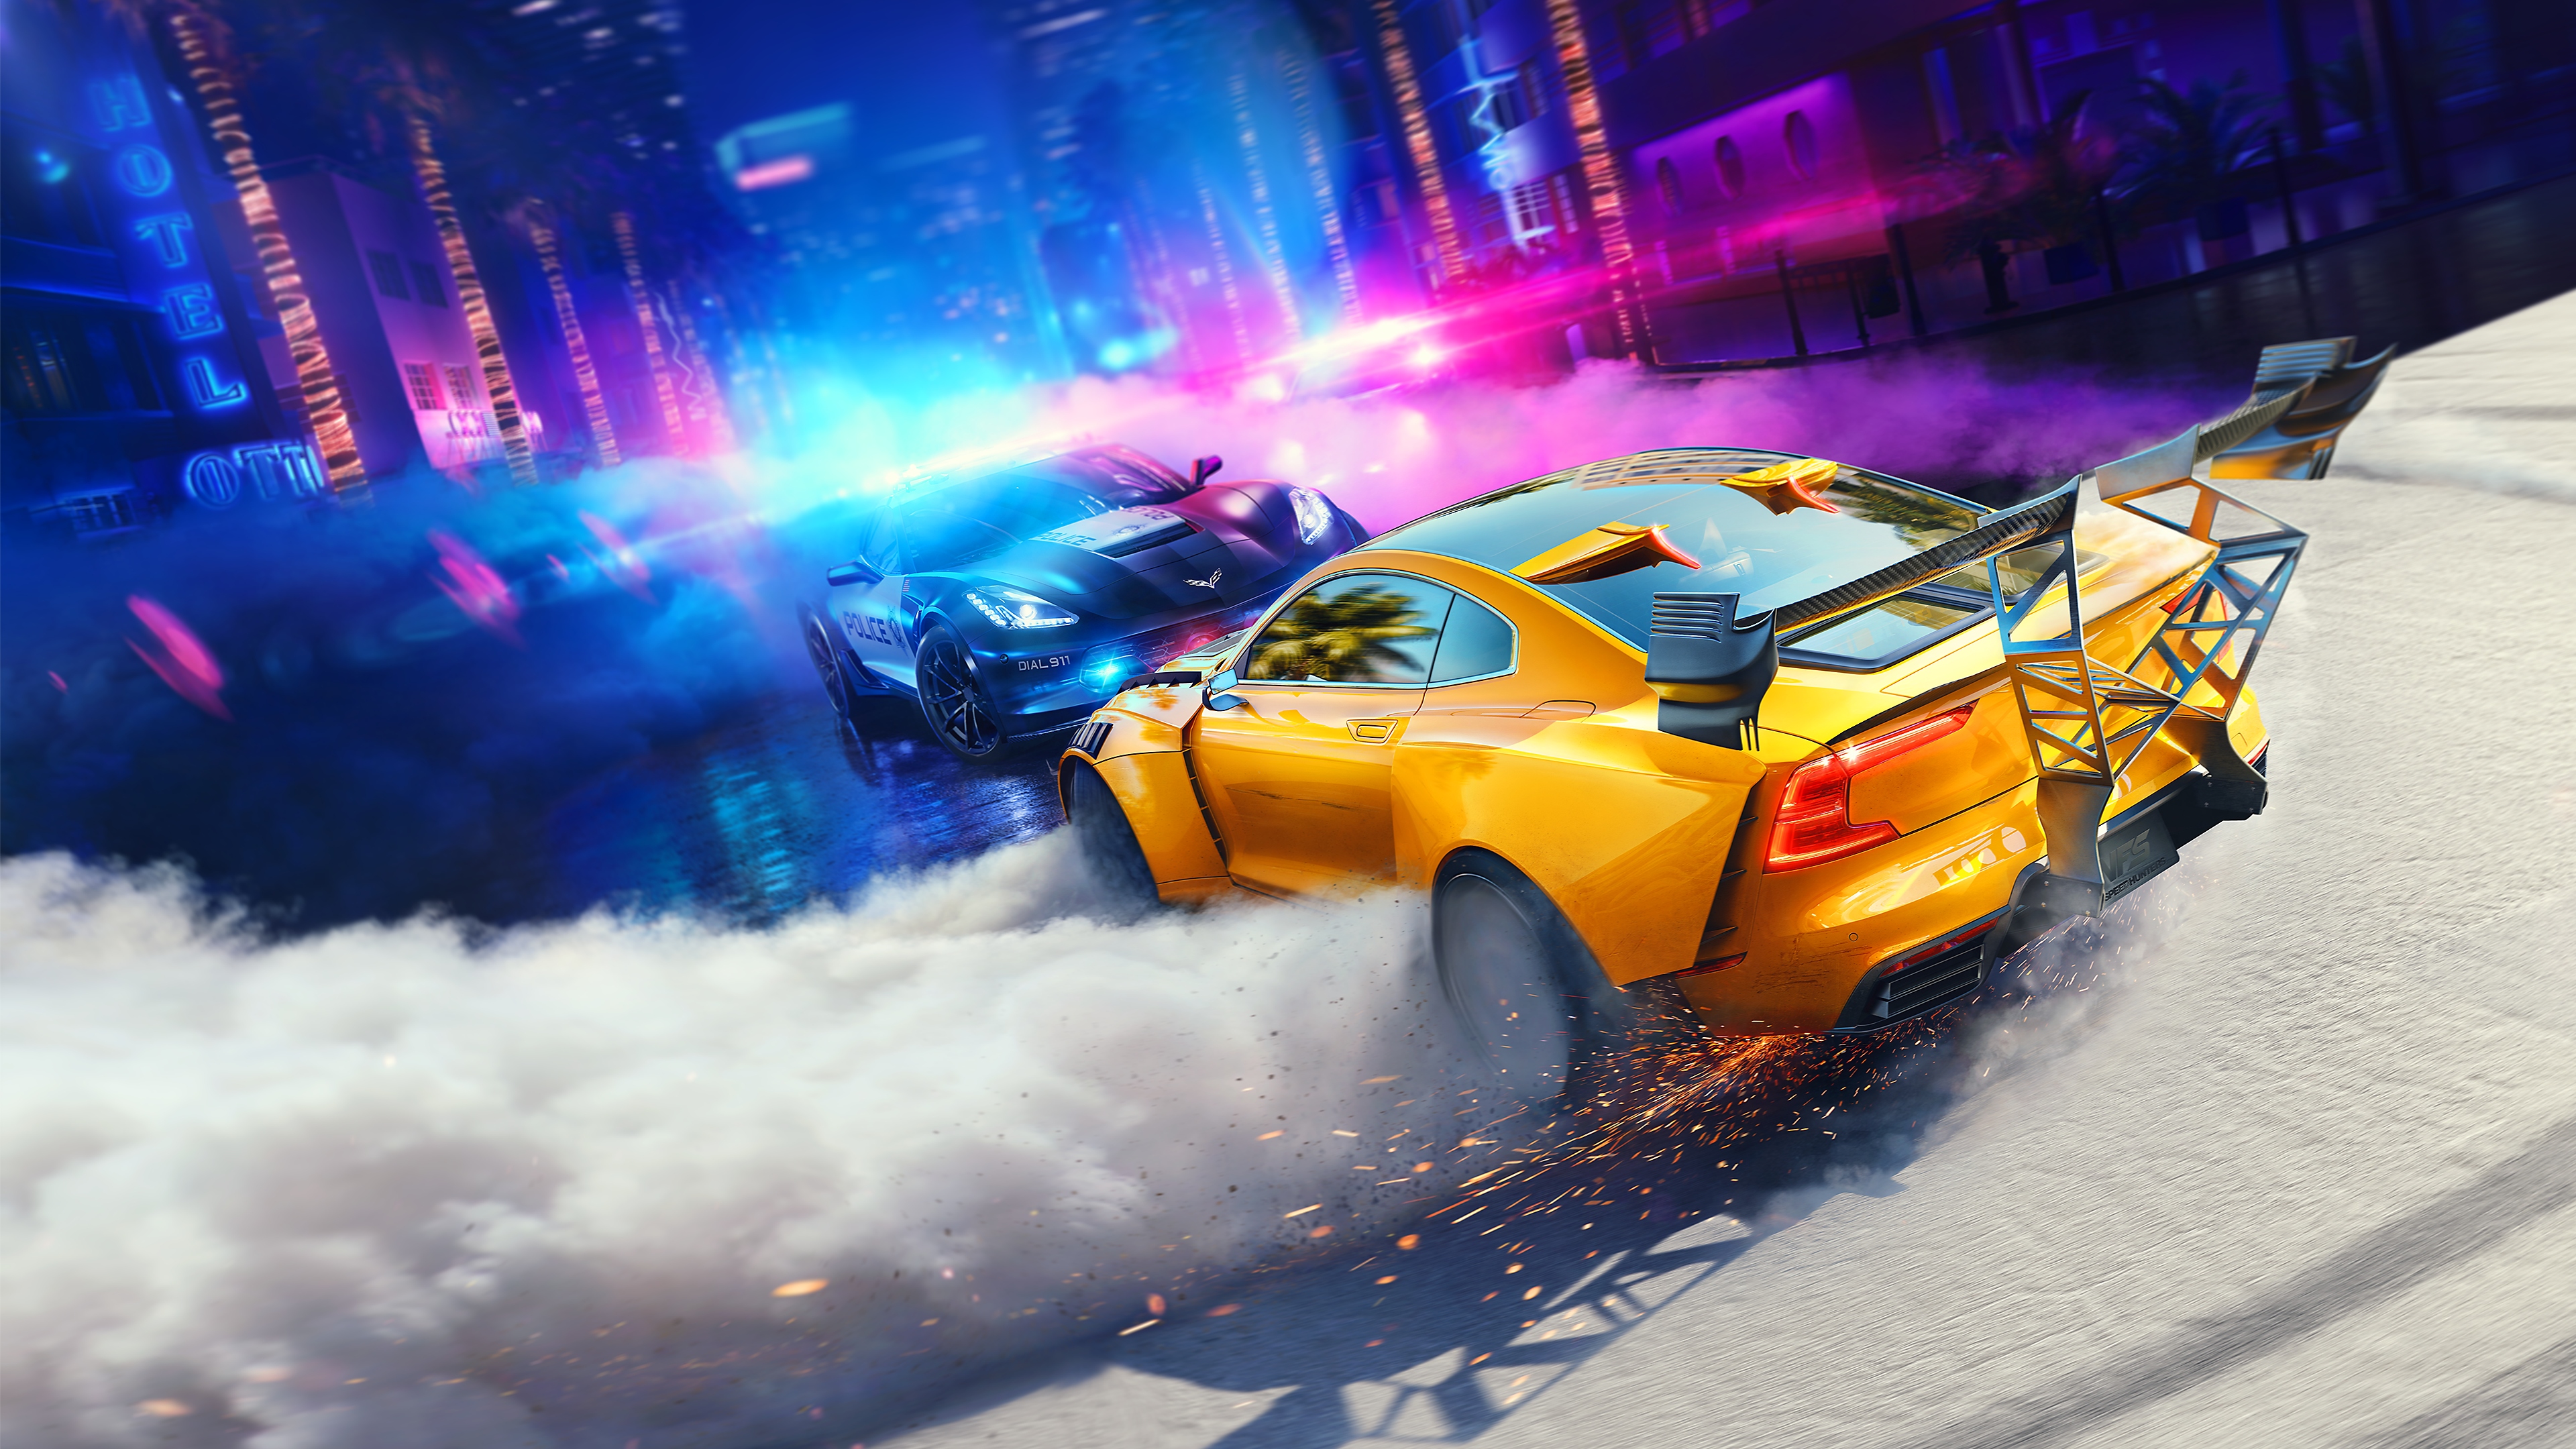 Need for speed heat key art image of car burning rubber